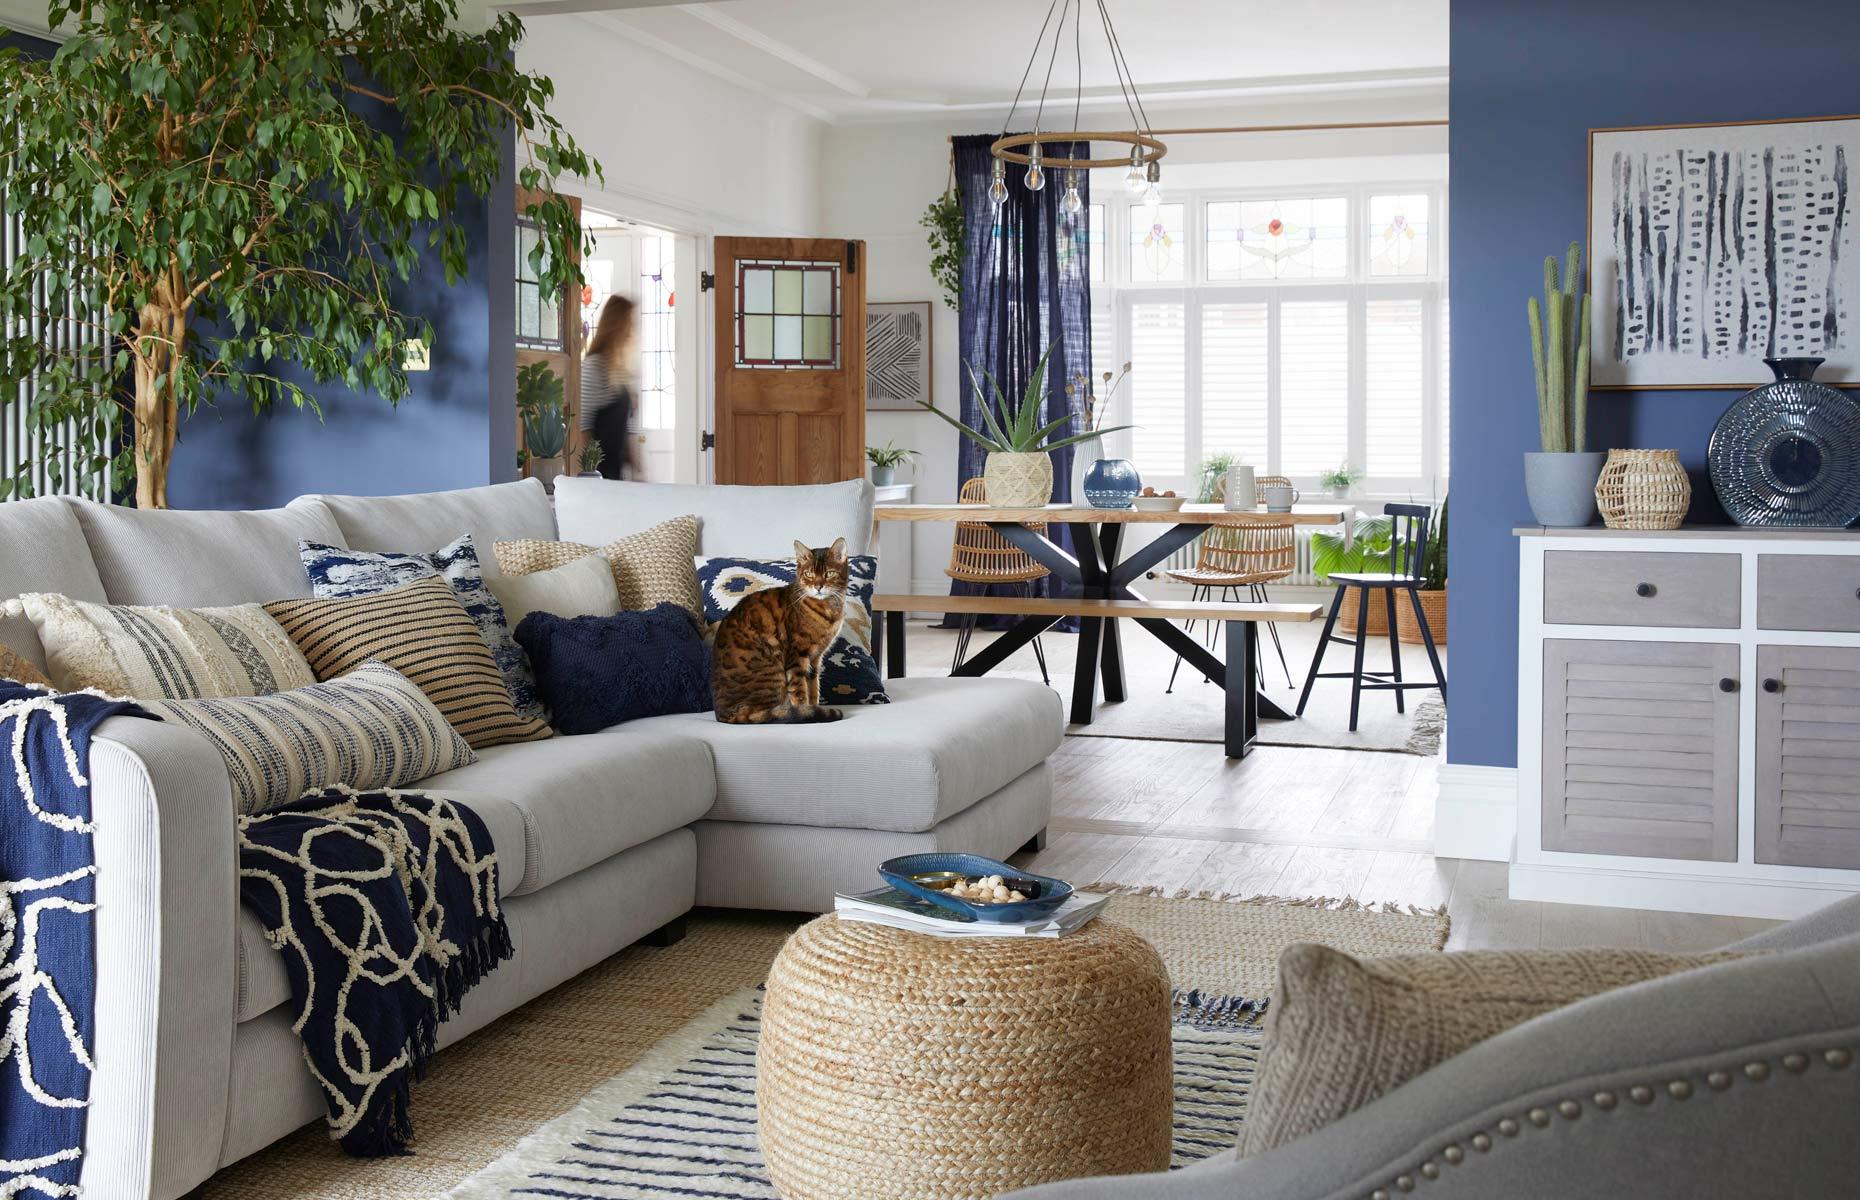 How To Transform Your Home Into Ocean-Inspired Bliss